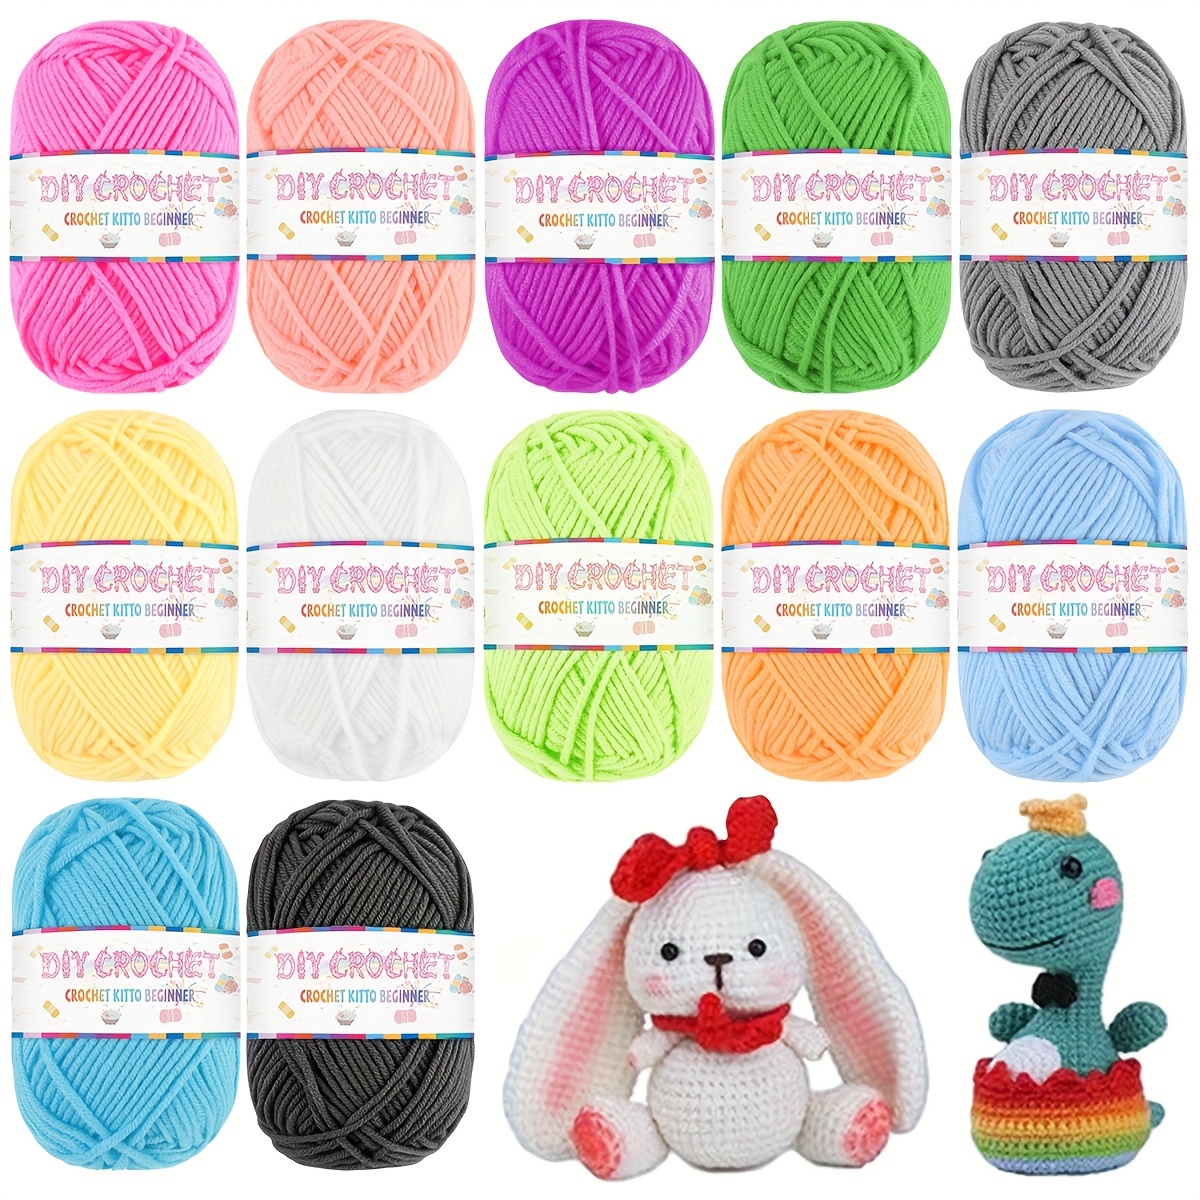 

12-pack Macaron Variegated Yarn - Acrylic 100% Mixed Colors, 10g Each For Crocheting And Knitting, Soft Material With Assorted Patterns, Beginner-friendly Crochet Kit With Transparent Packaging